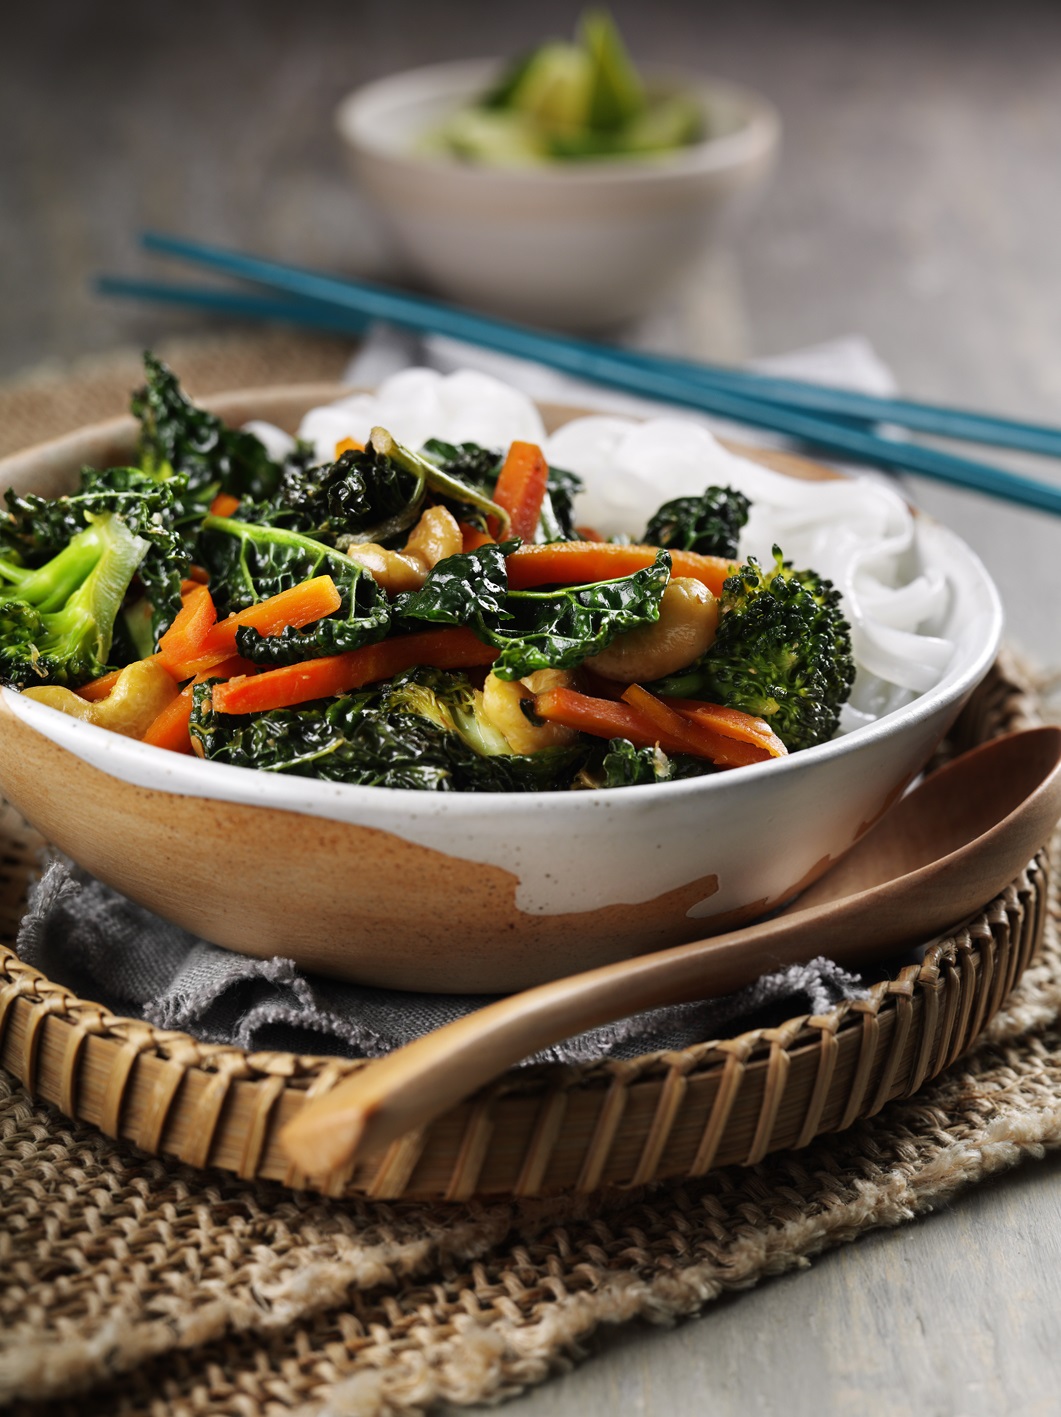 How To Make A Cavolo Nero, Noodle And Miso Stir Fry